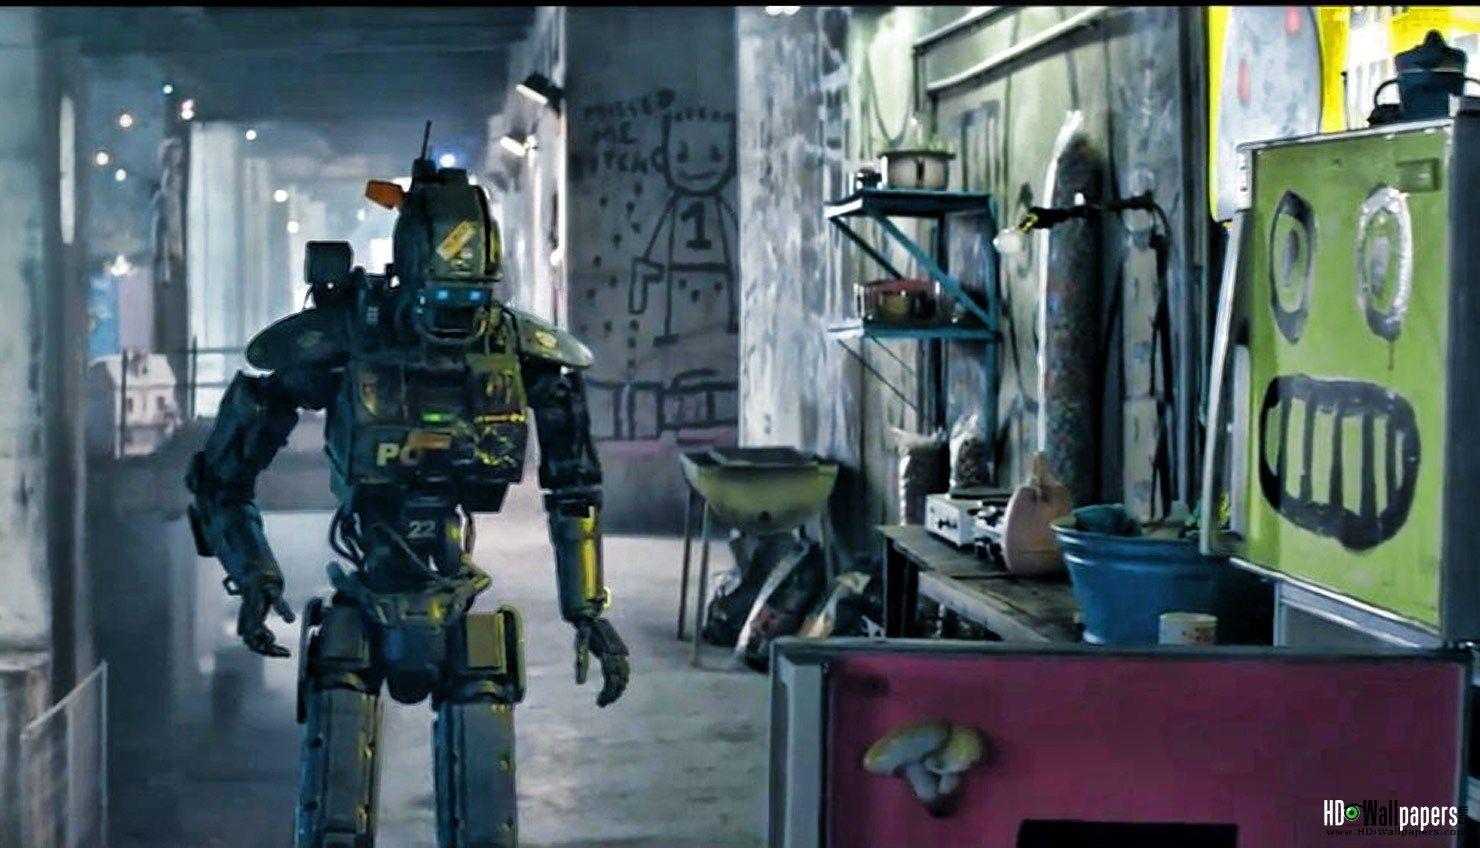 Chappie (2015) Review